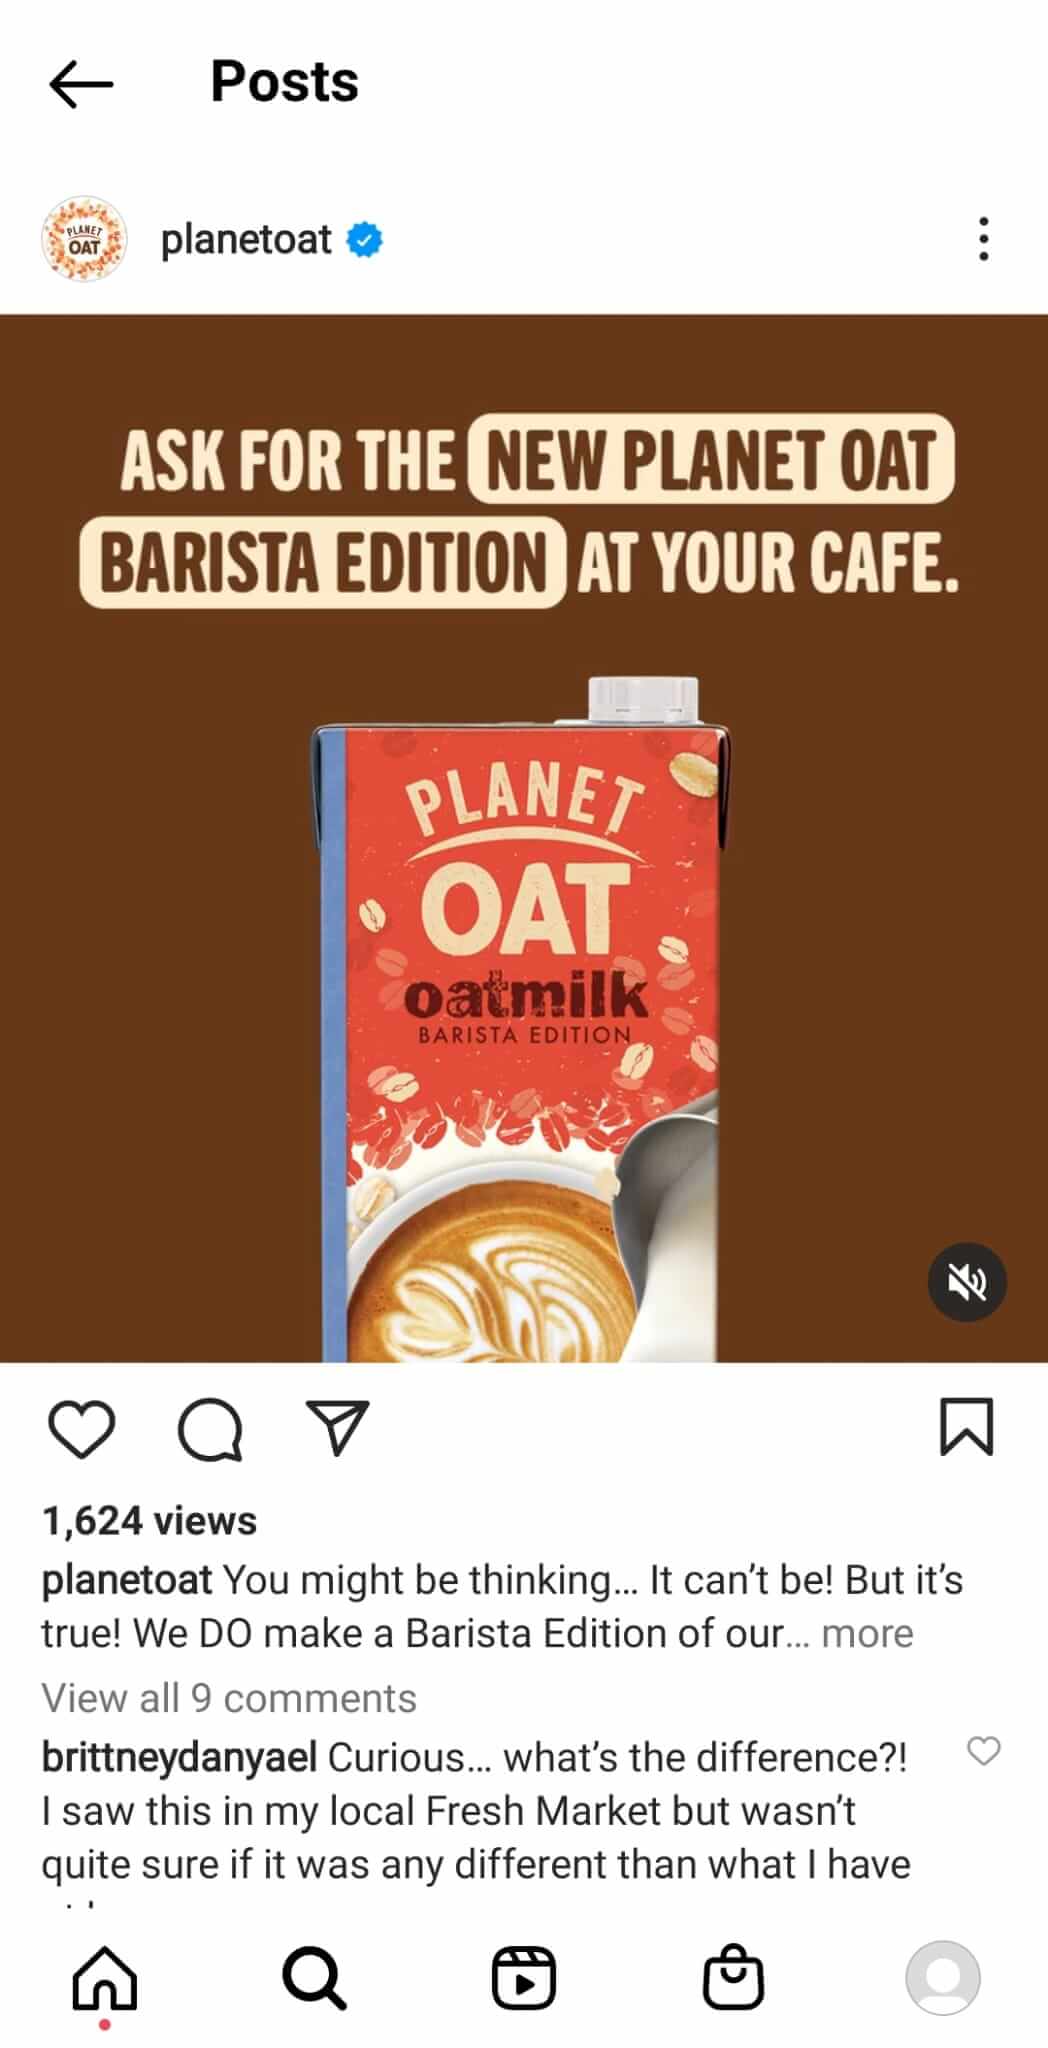 instagram-planet-oat-cutsomer-ask-purchase-example